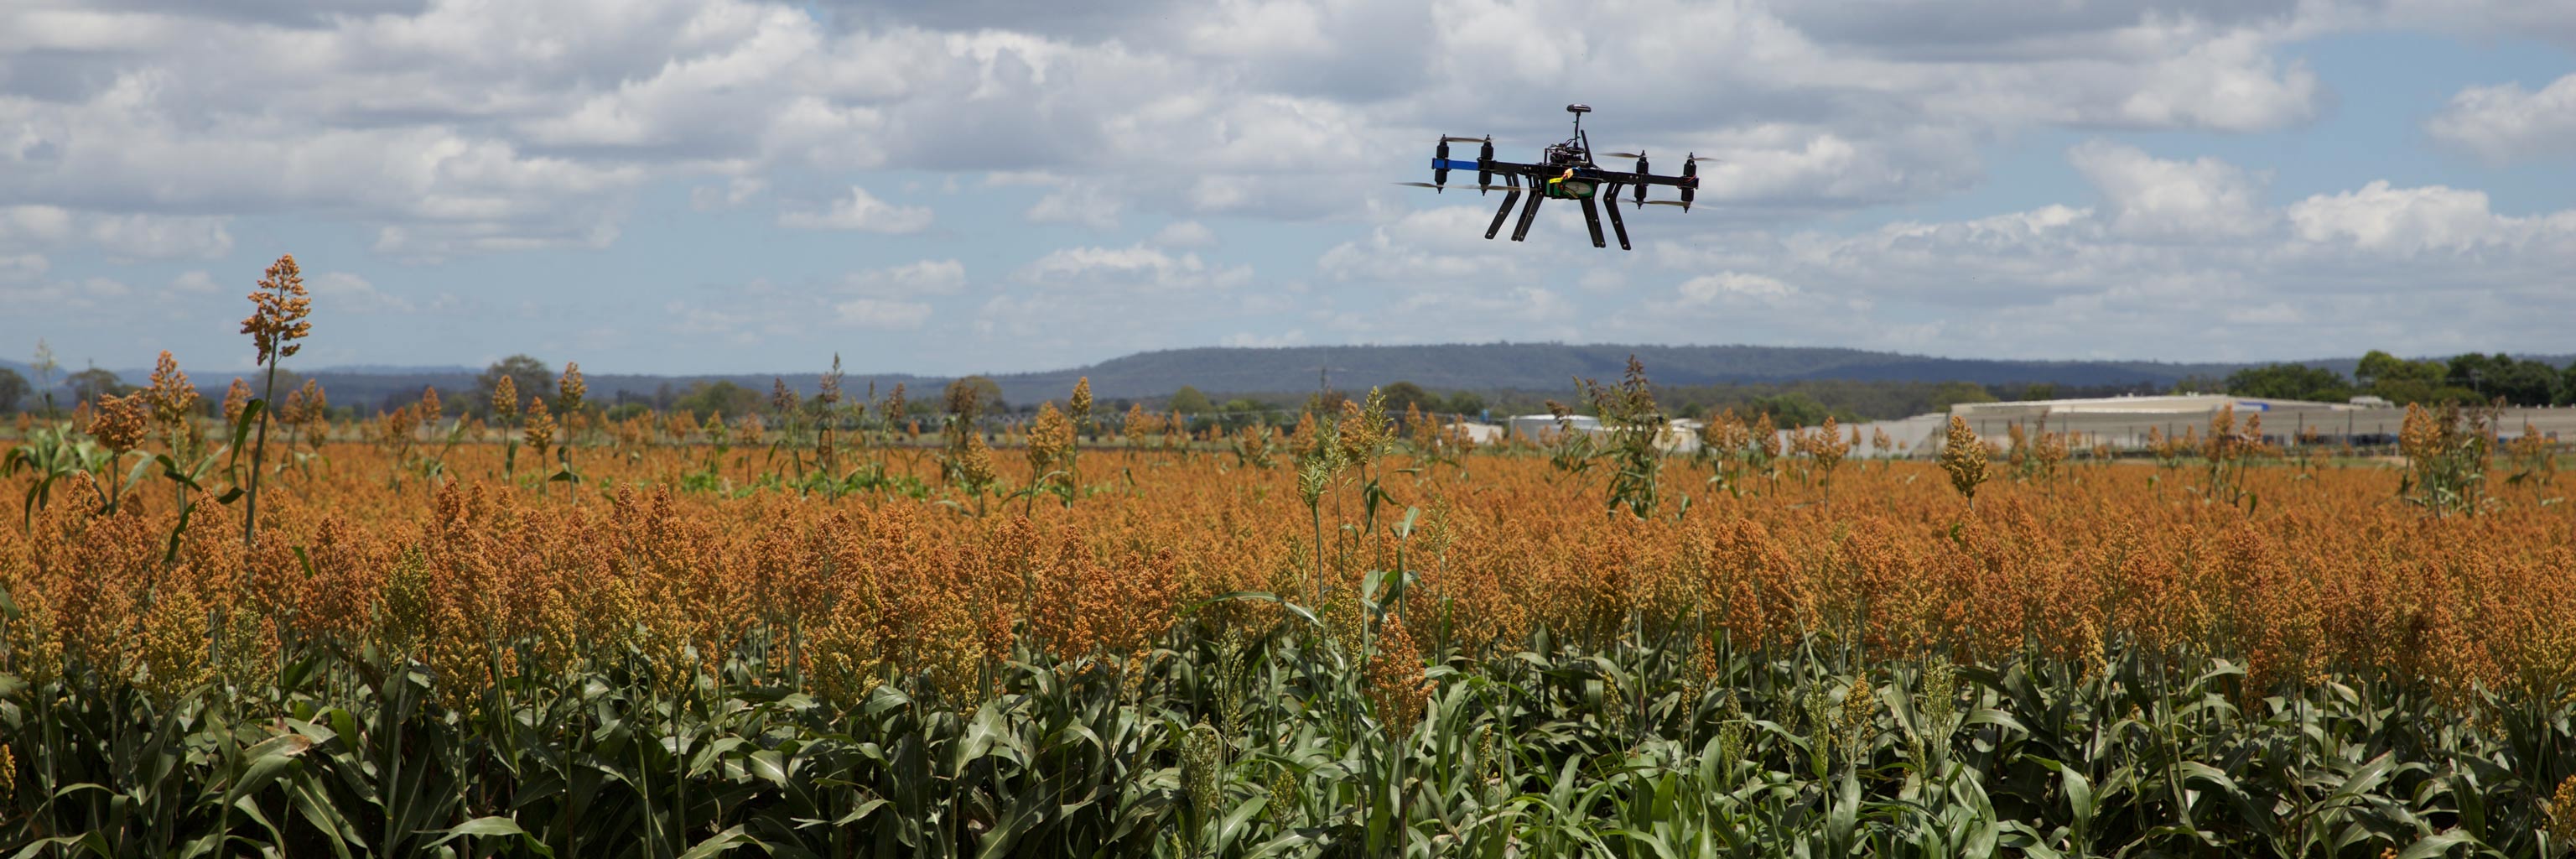 Drone flies over a field of crops